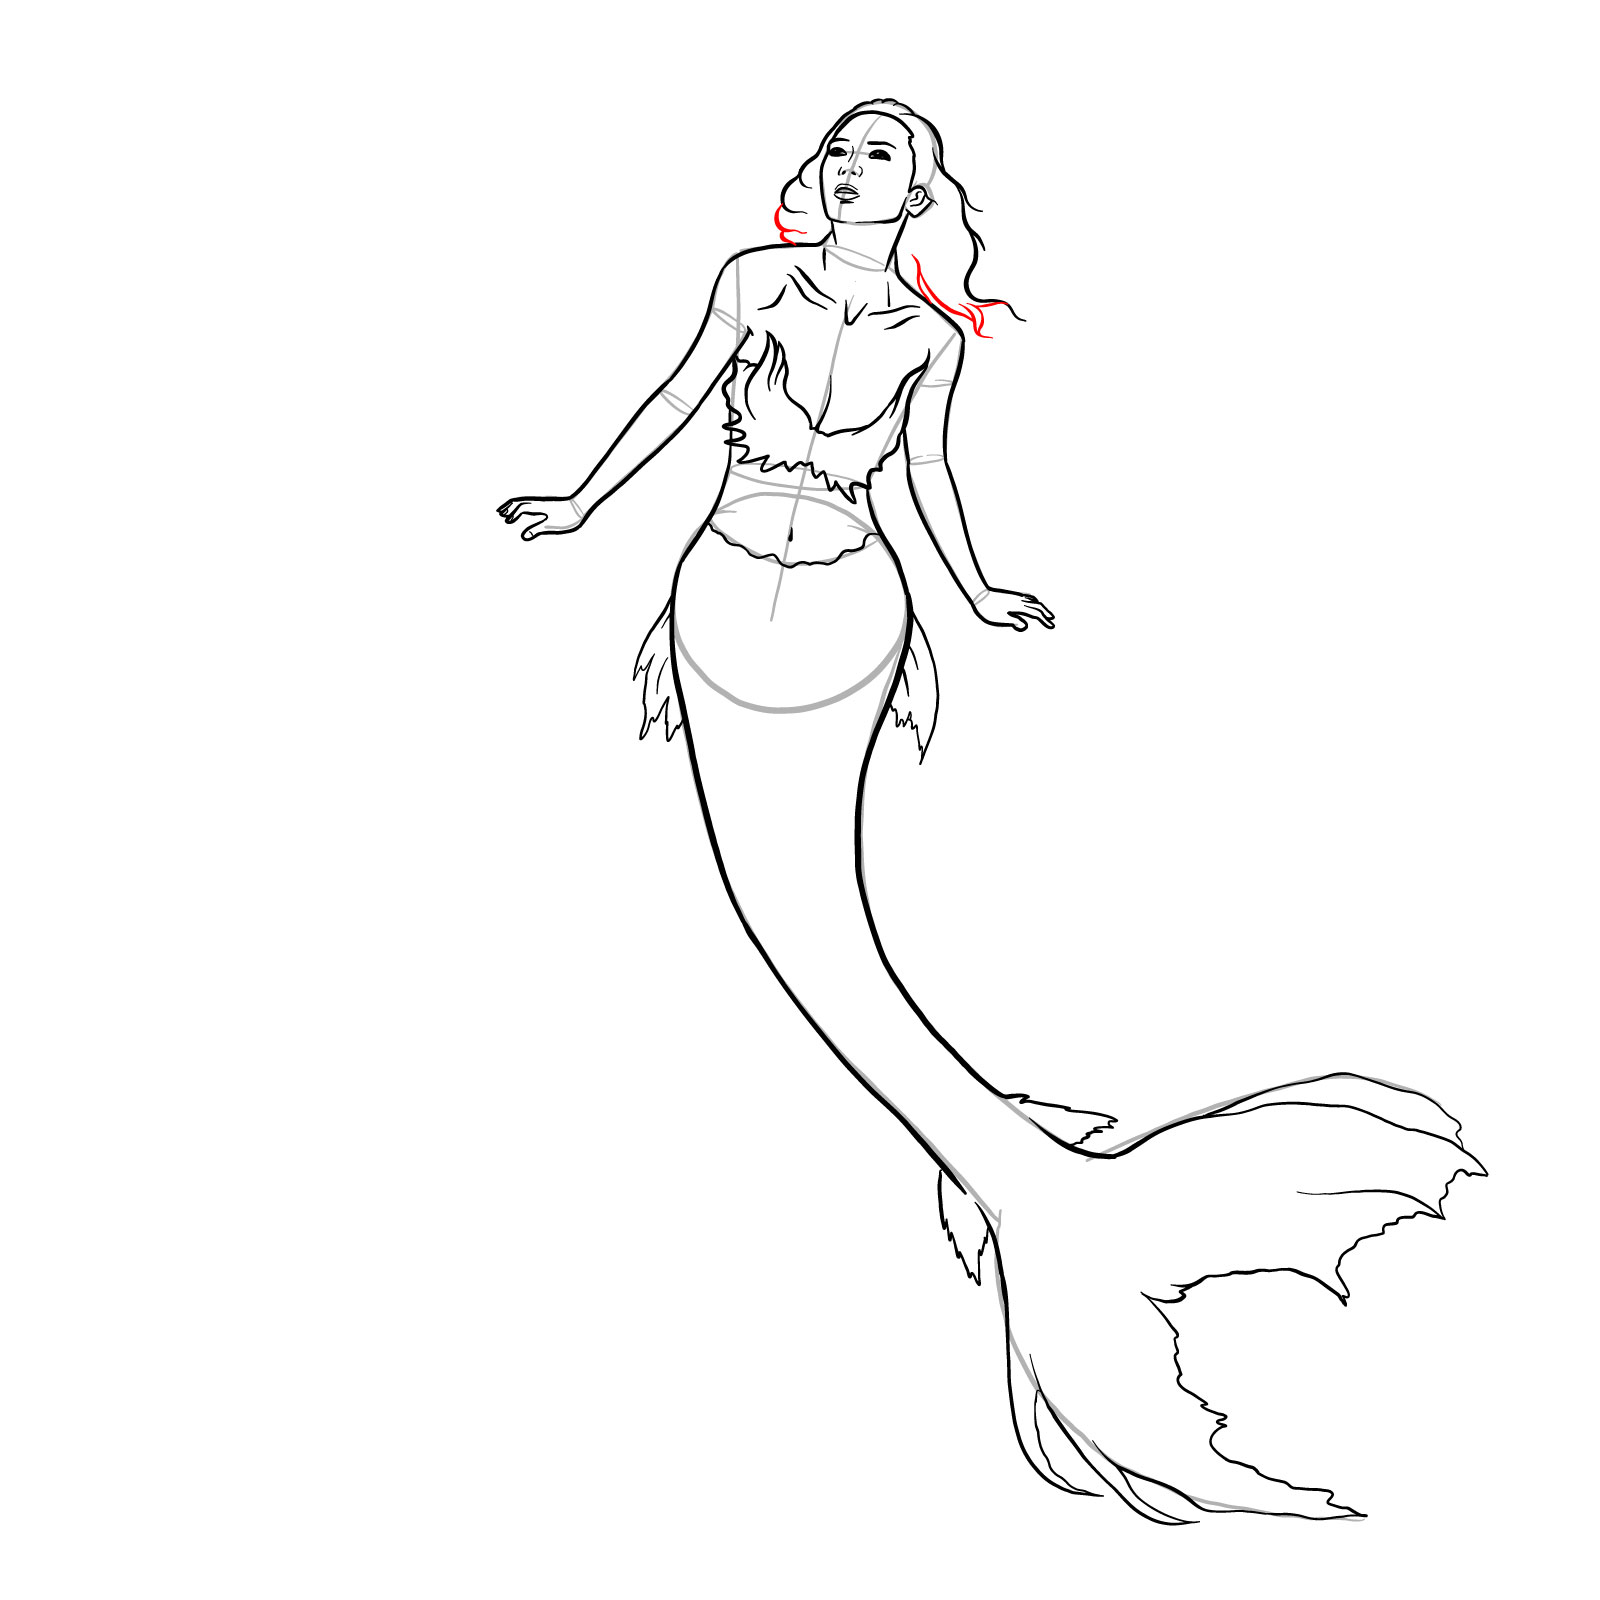 How to draw a Mermaid - step 27